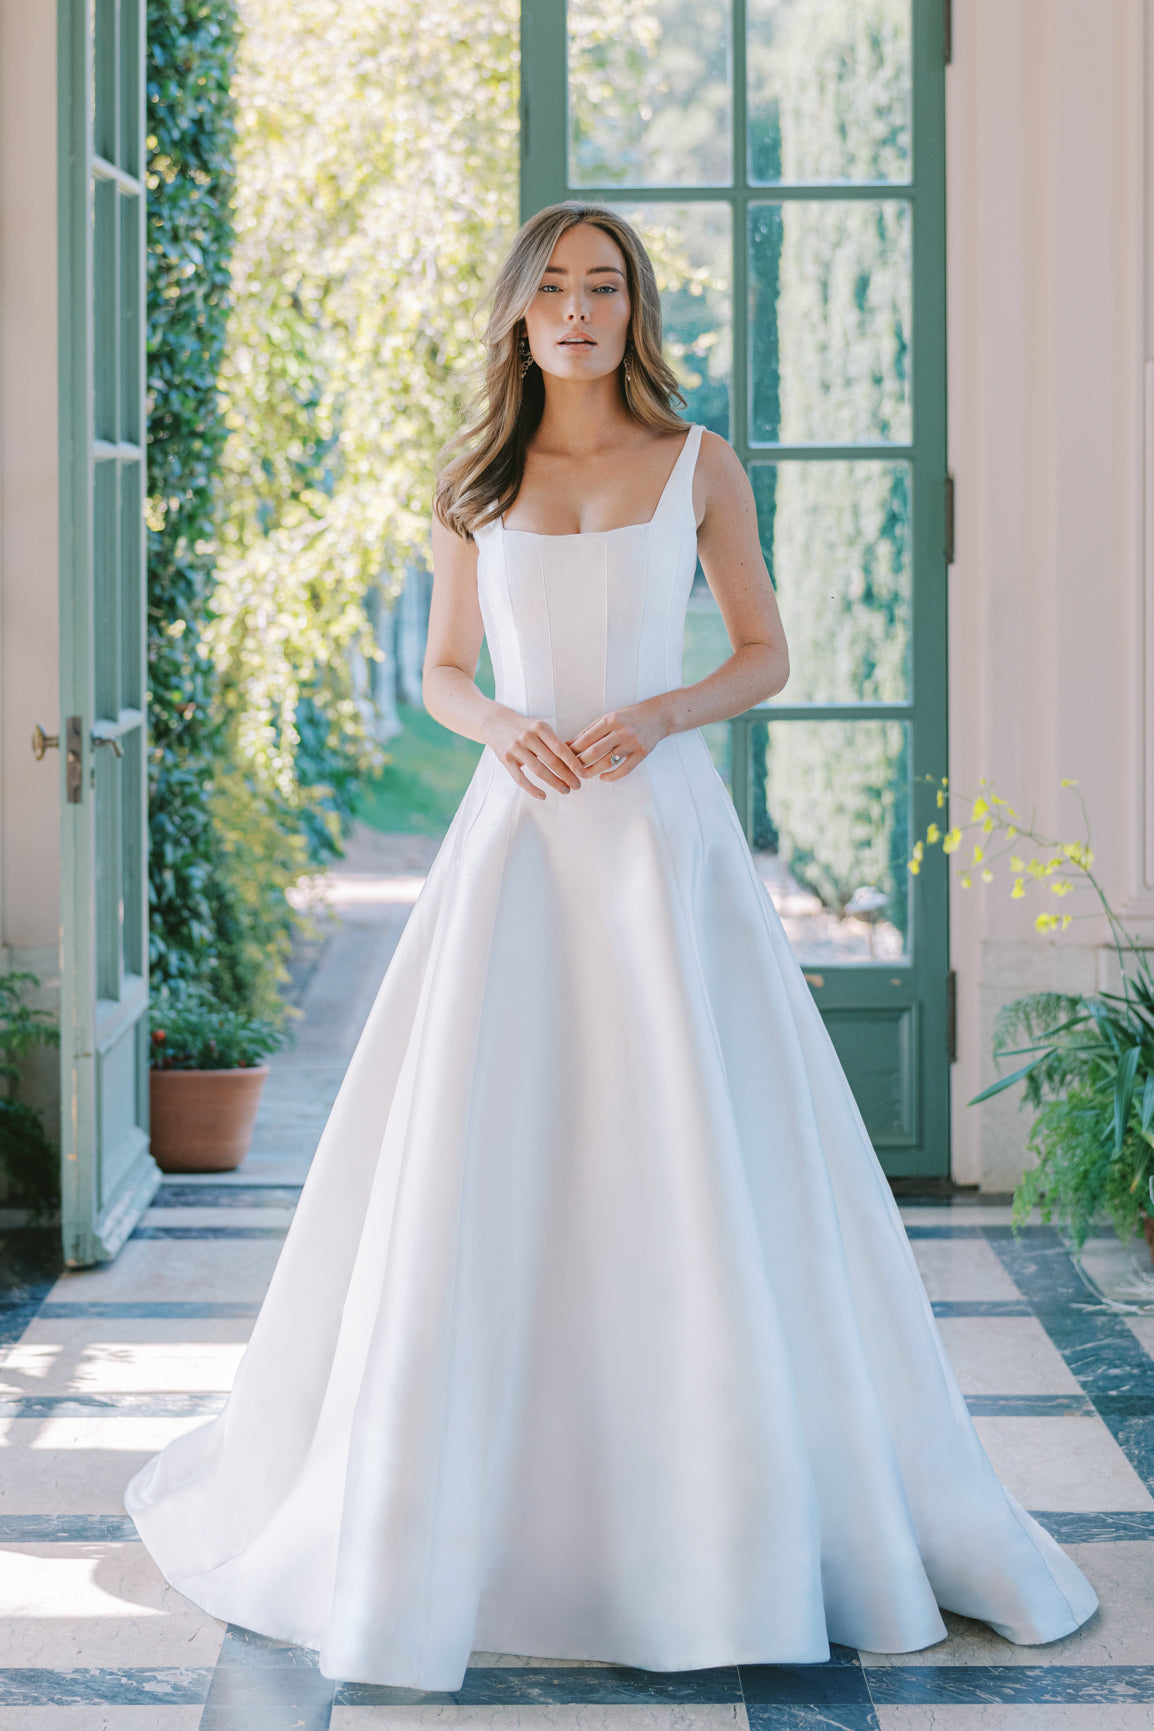 Anne Barge Fall 2020 Bridal Collection - Chicago Style Weddings